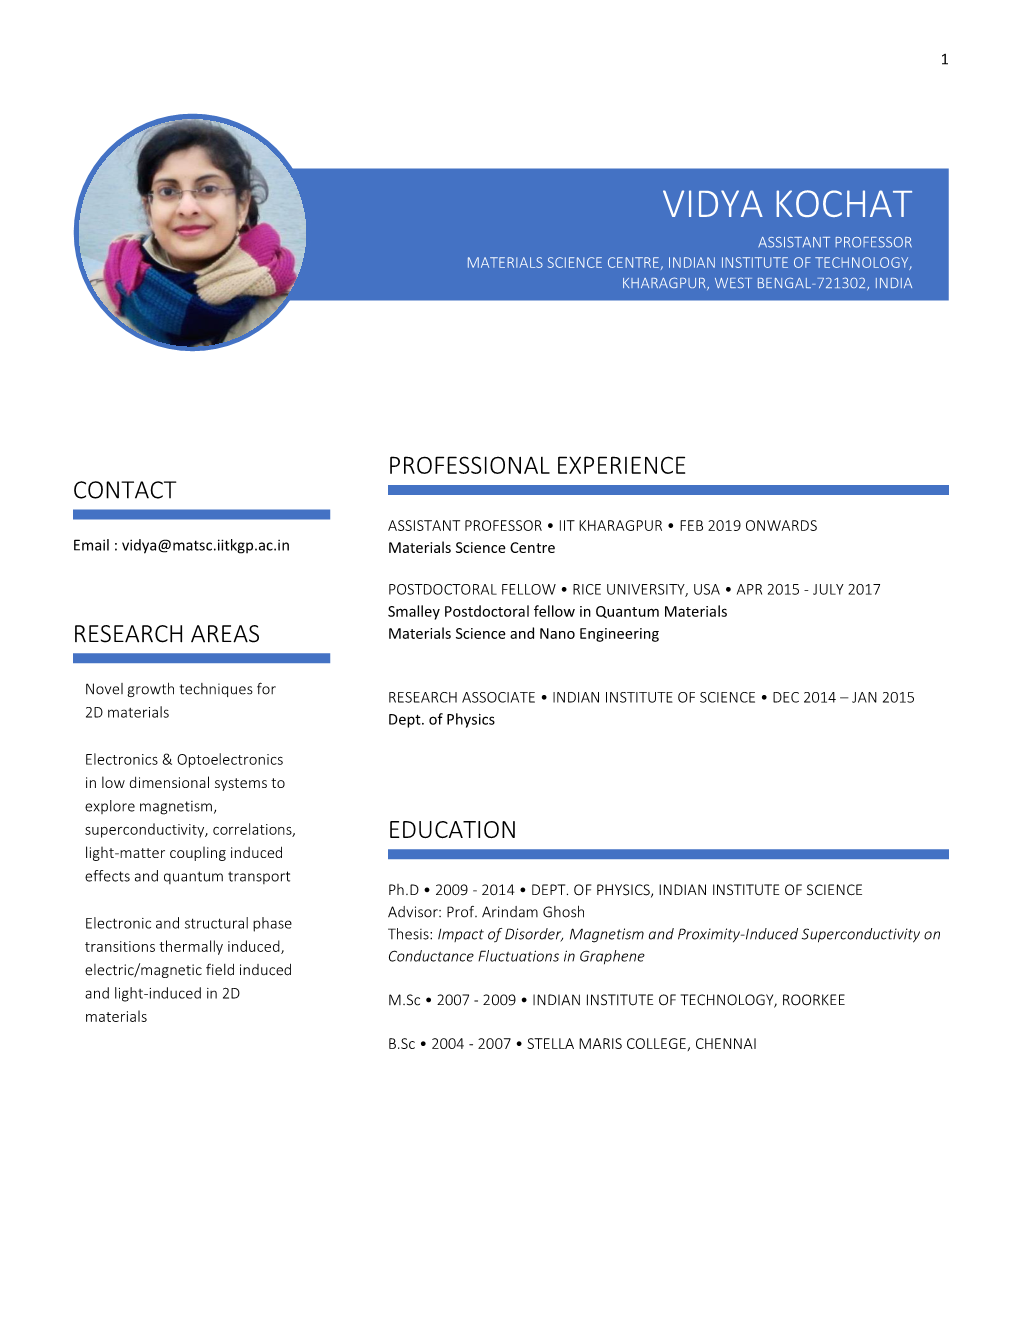 Vidya Kochat Assistant Professor Materials Science Centre, Indian Institute of Technology, Kharagpur, West Bengal-721302, India